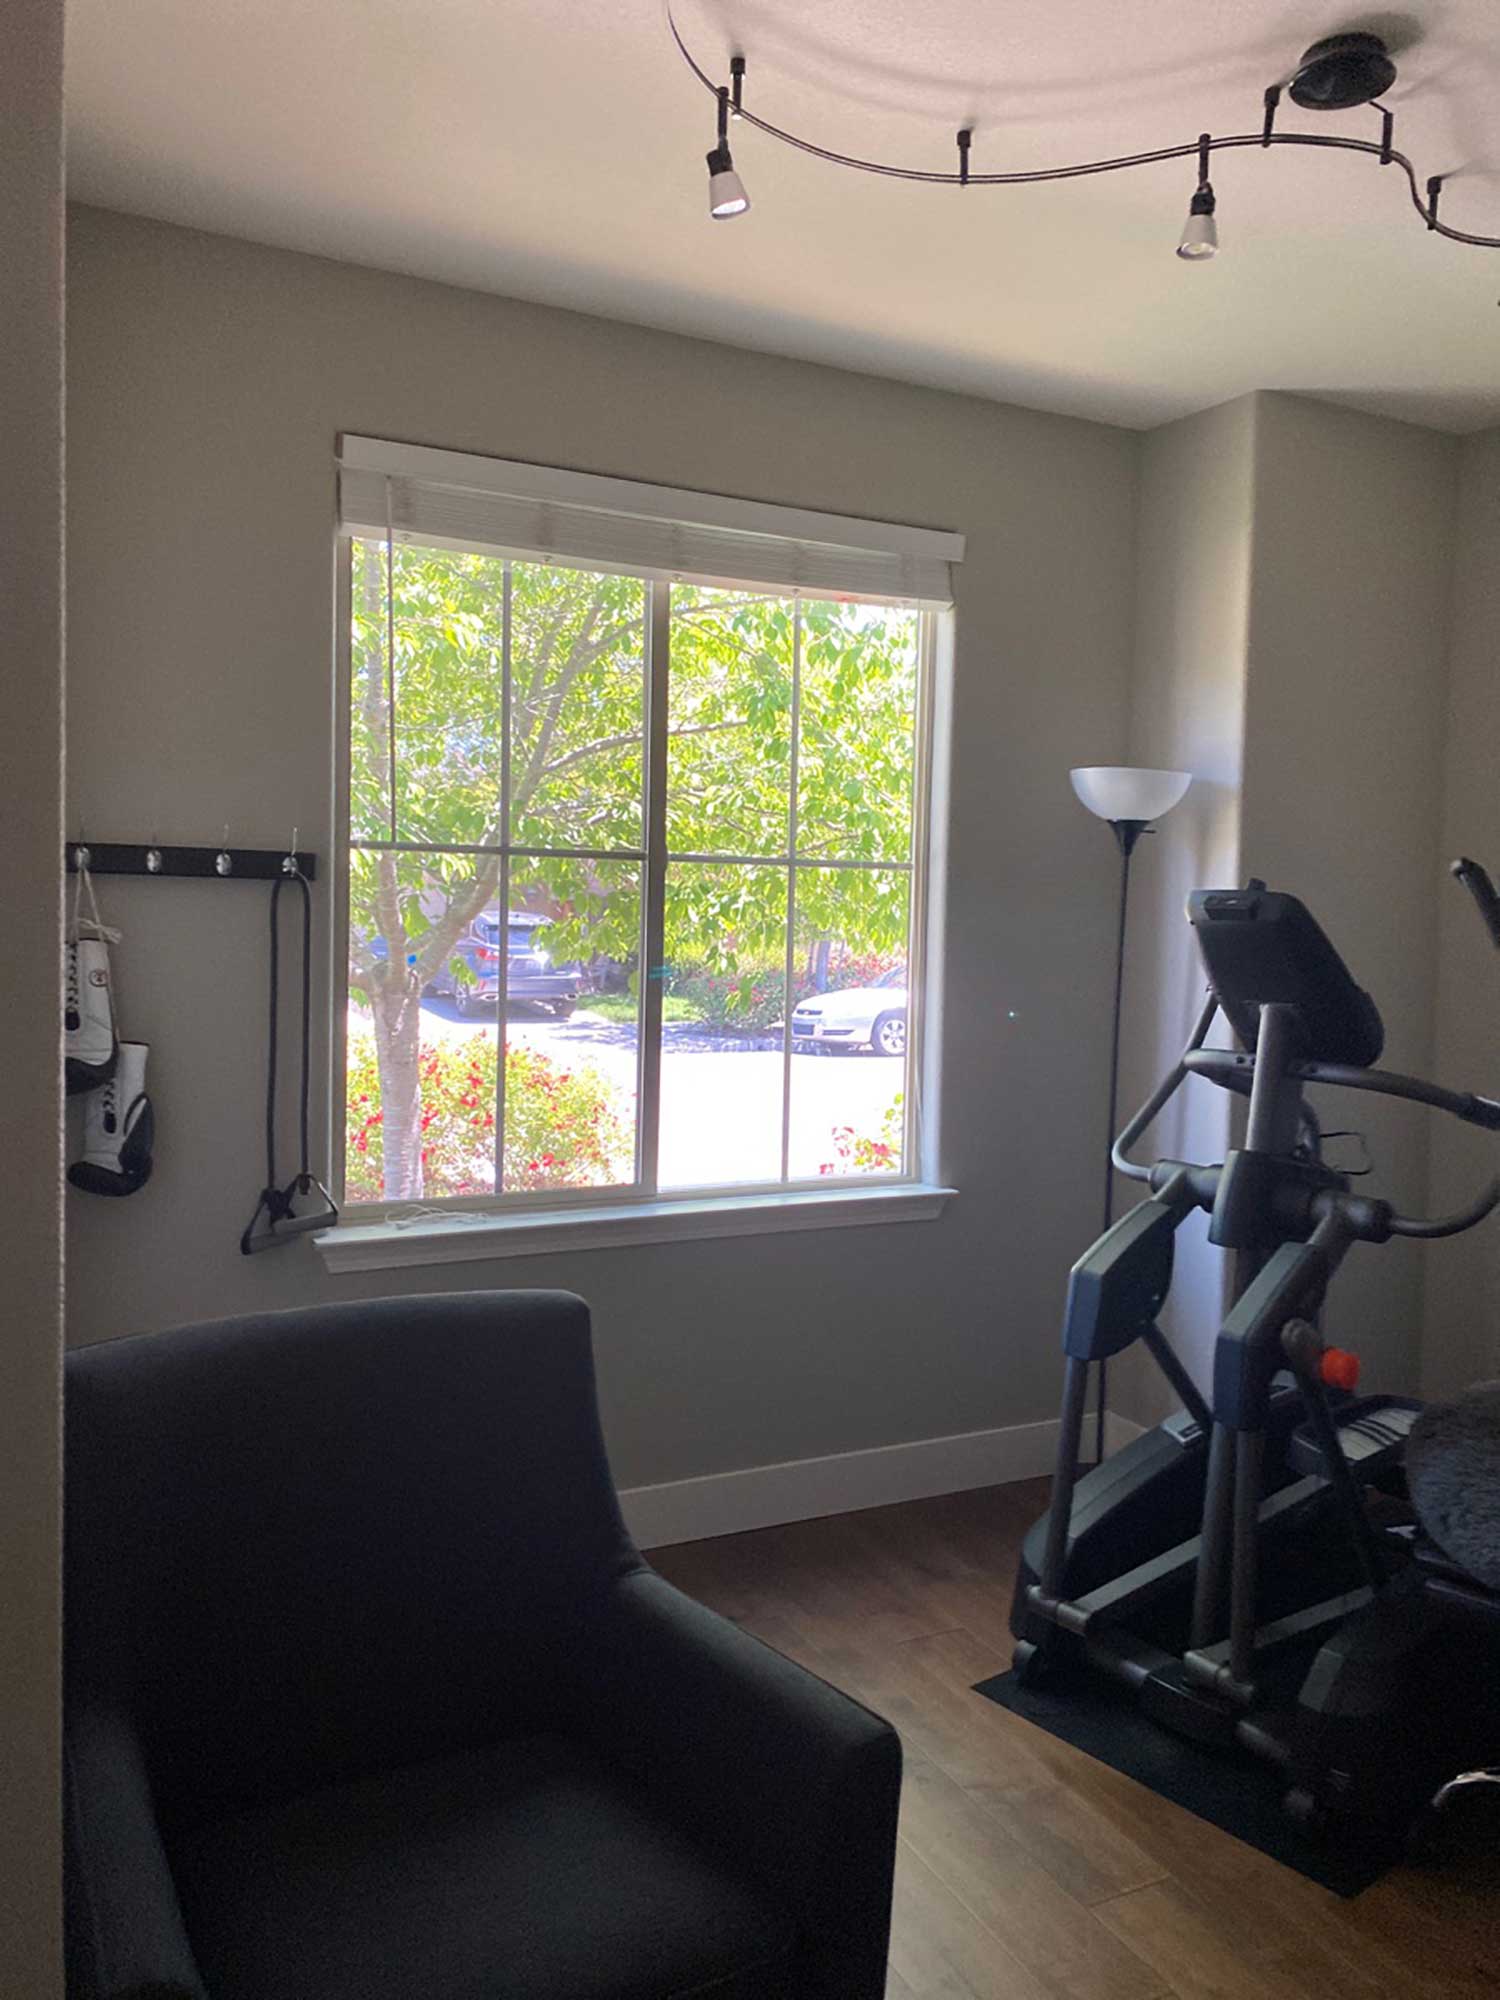 ClimatePro installed 3M Neutral Series Window Tint on this Santa Rosa, CA home.